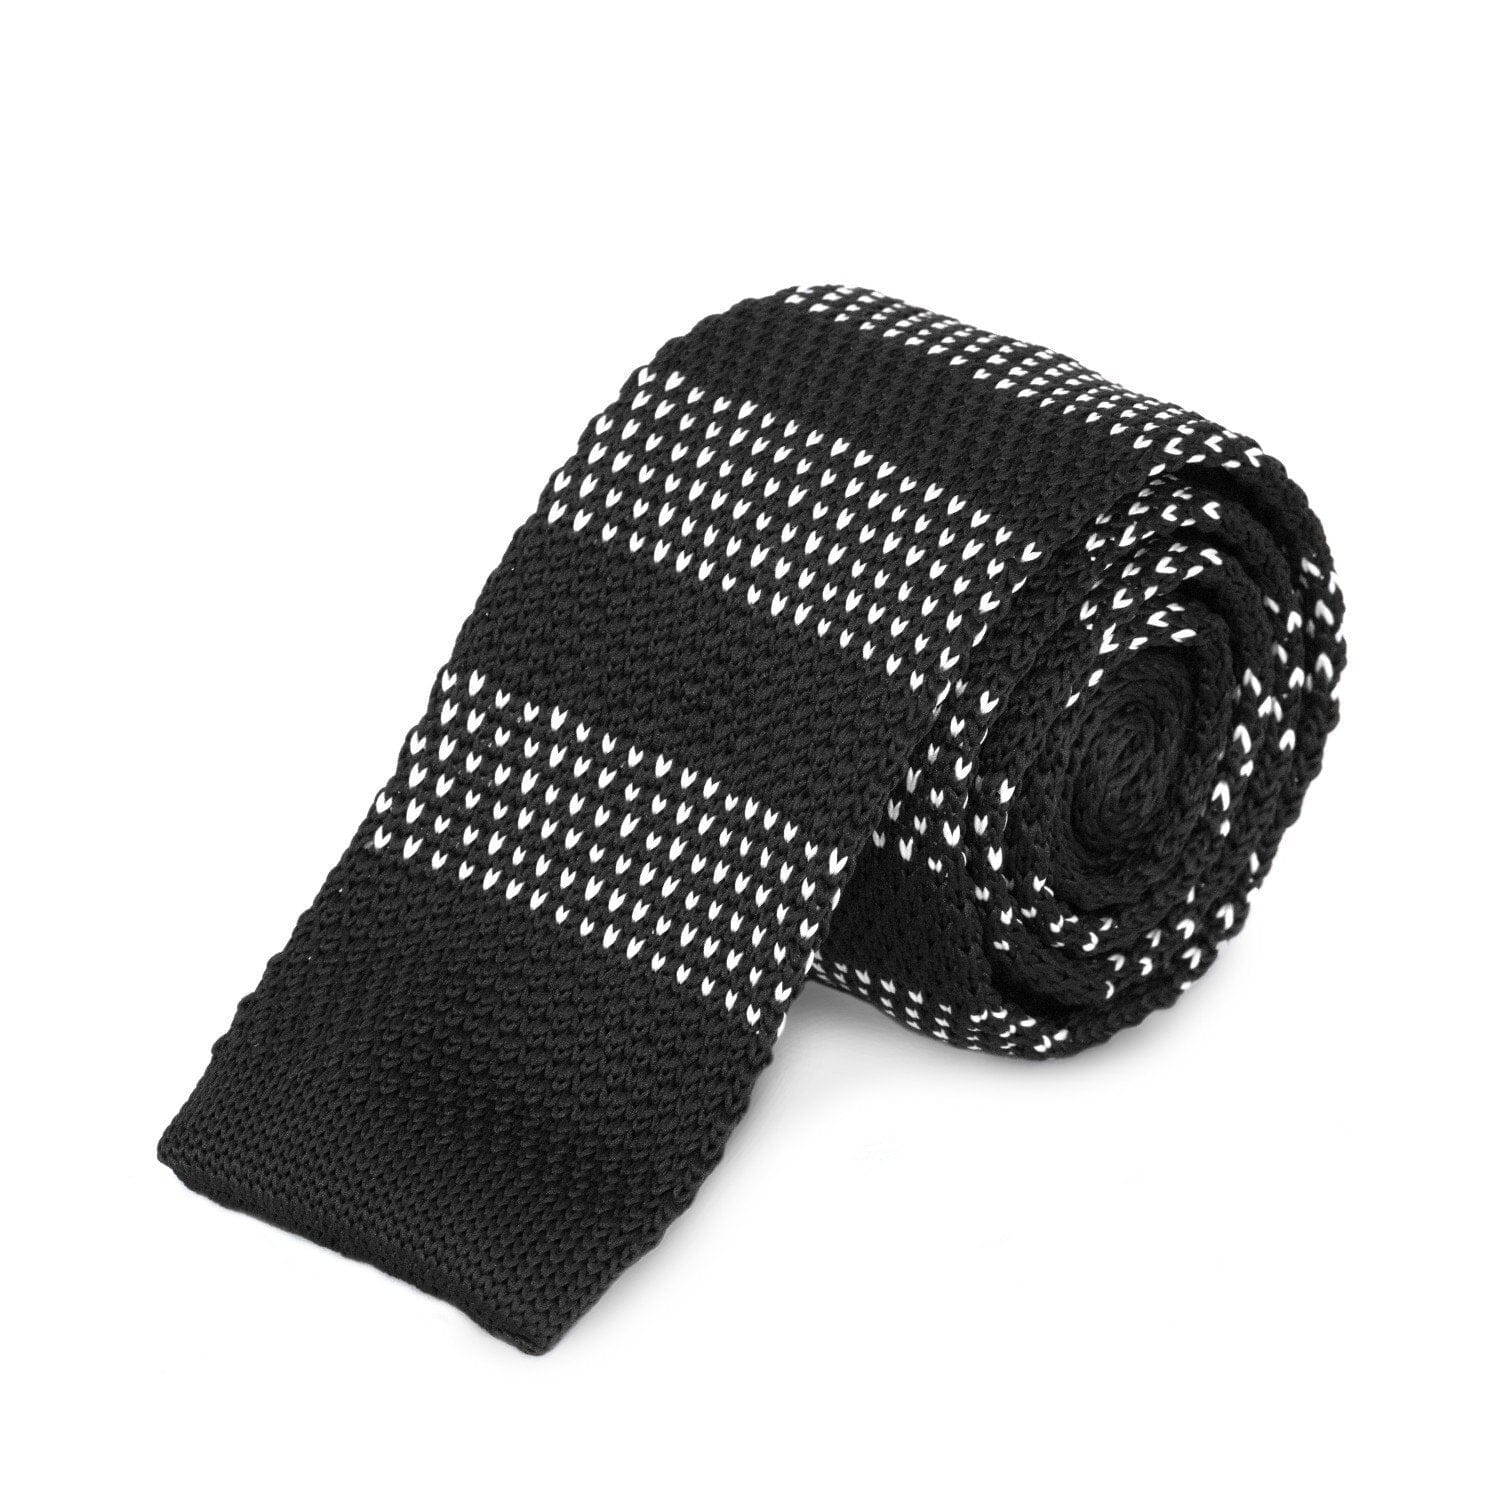 Black and White Stripe Knitted Tie Ties Cuffed.com.au 